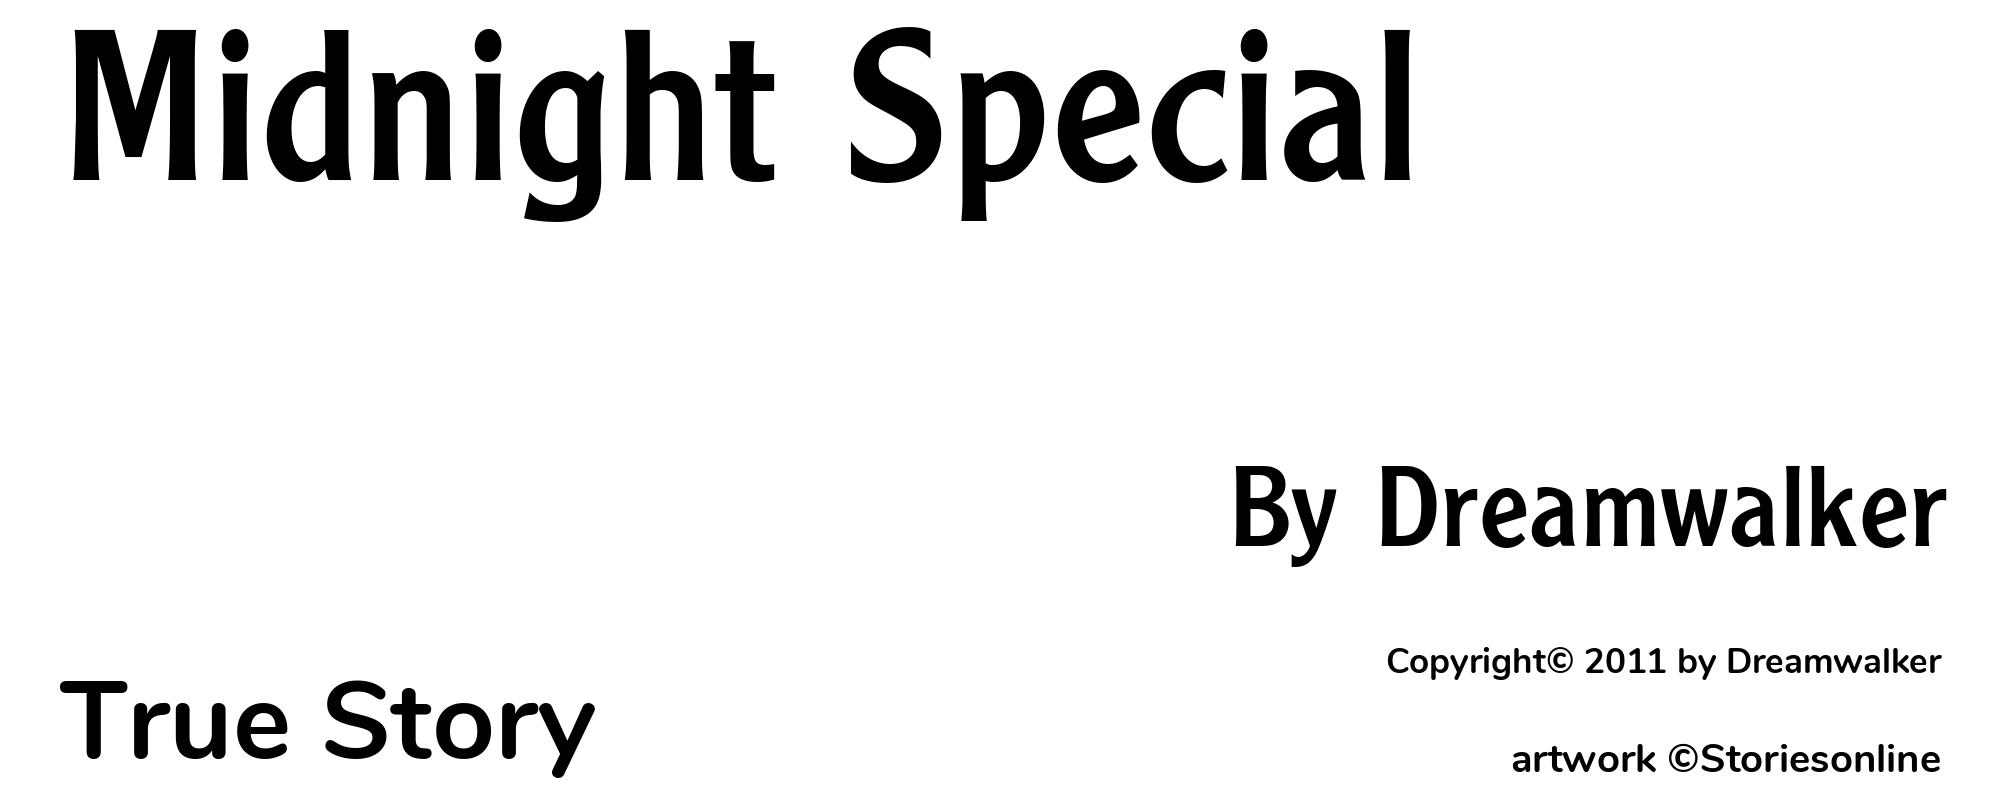 Midnight Special - Cover